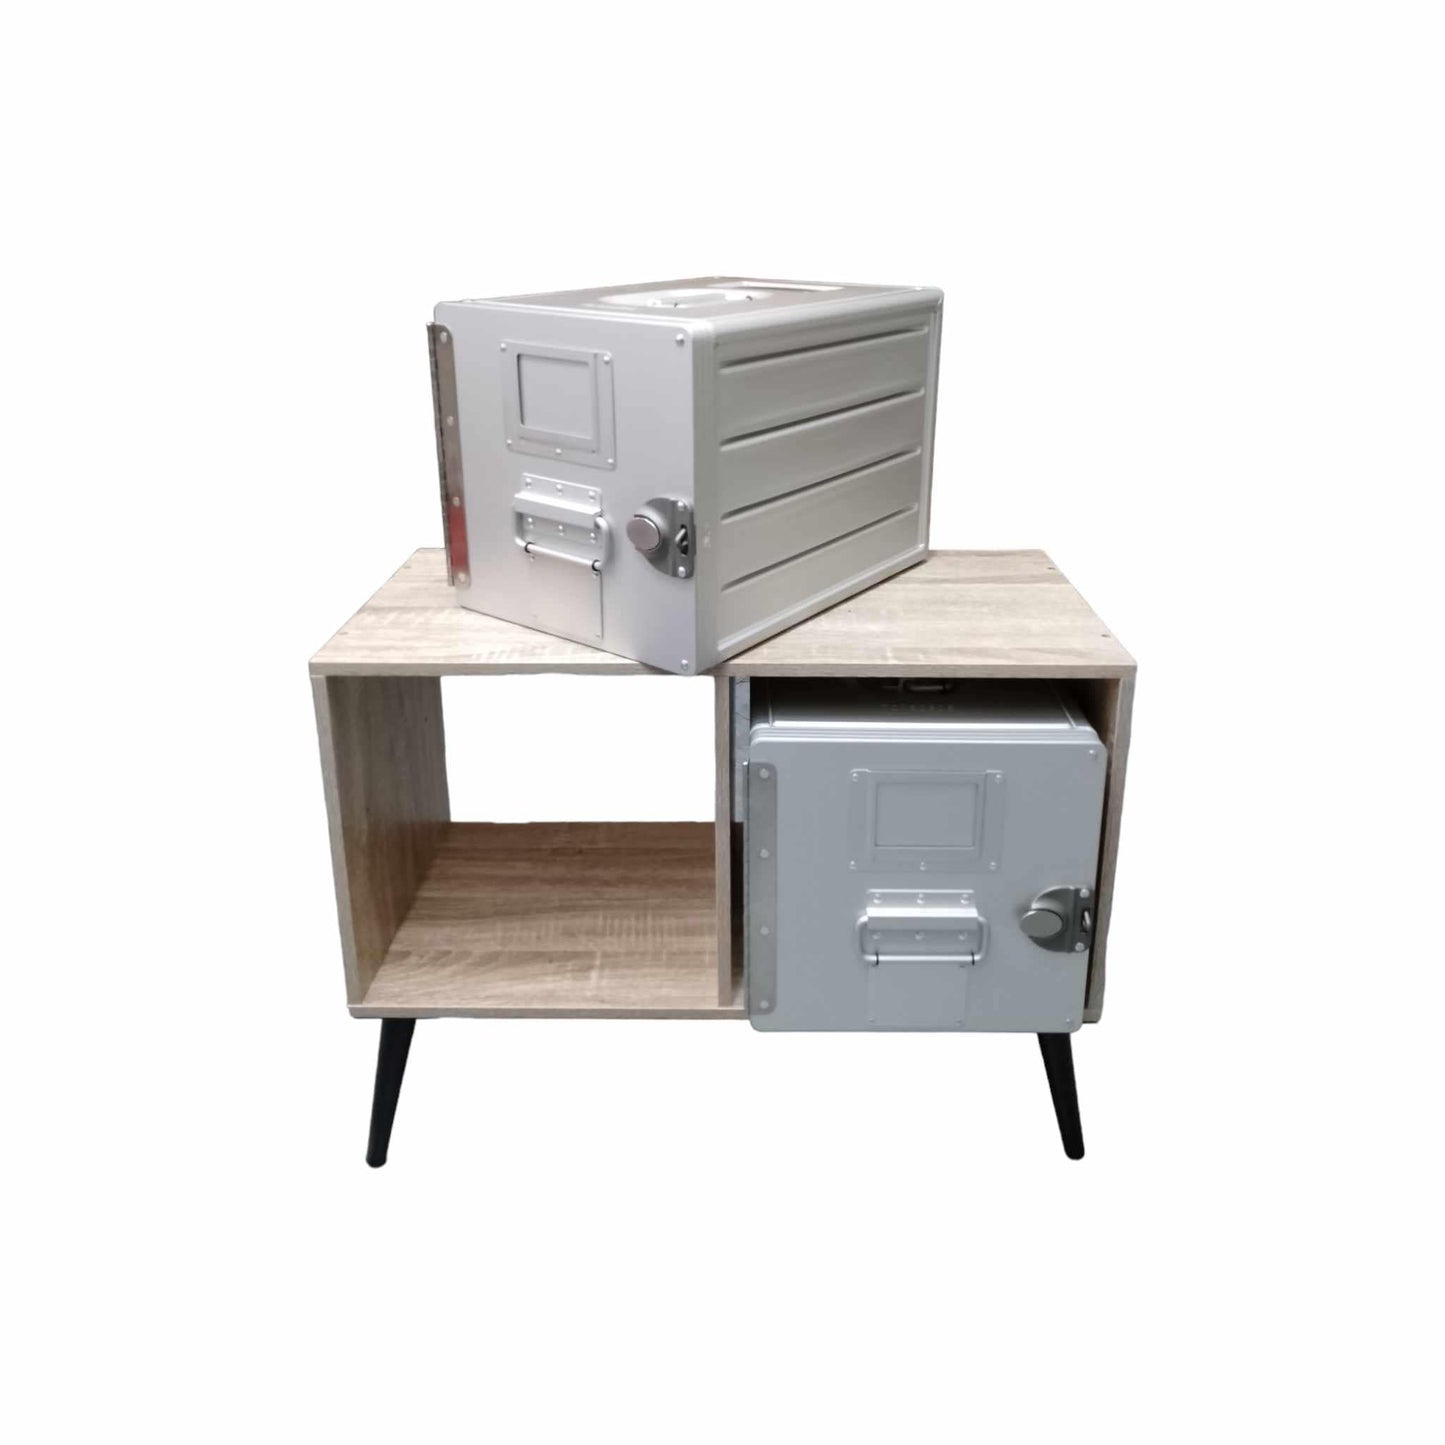 Aviation Console Table Cabinet with Brand New Aircraft Galley Storage Containers Hainan Korita